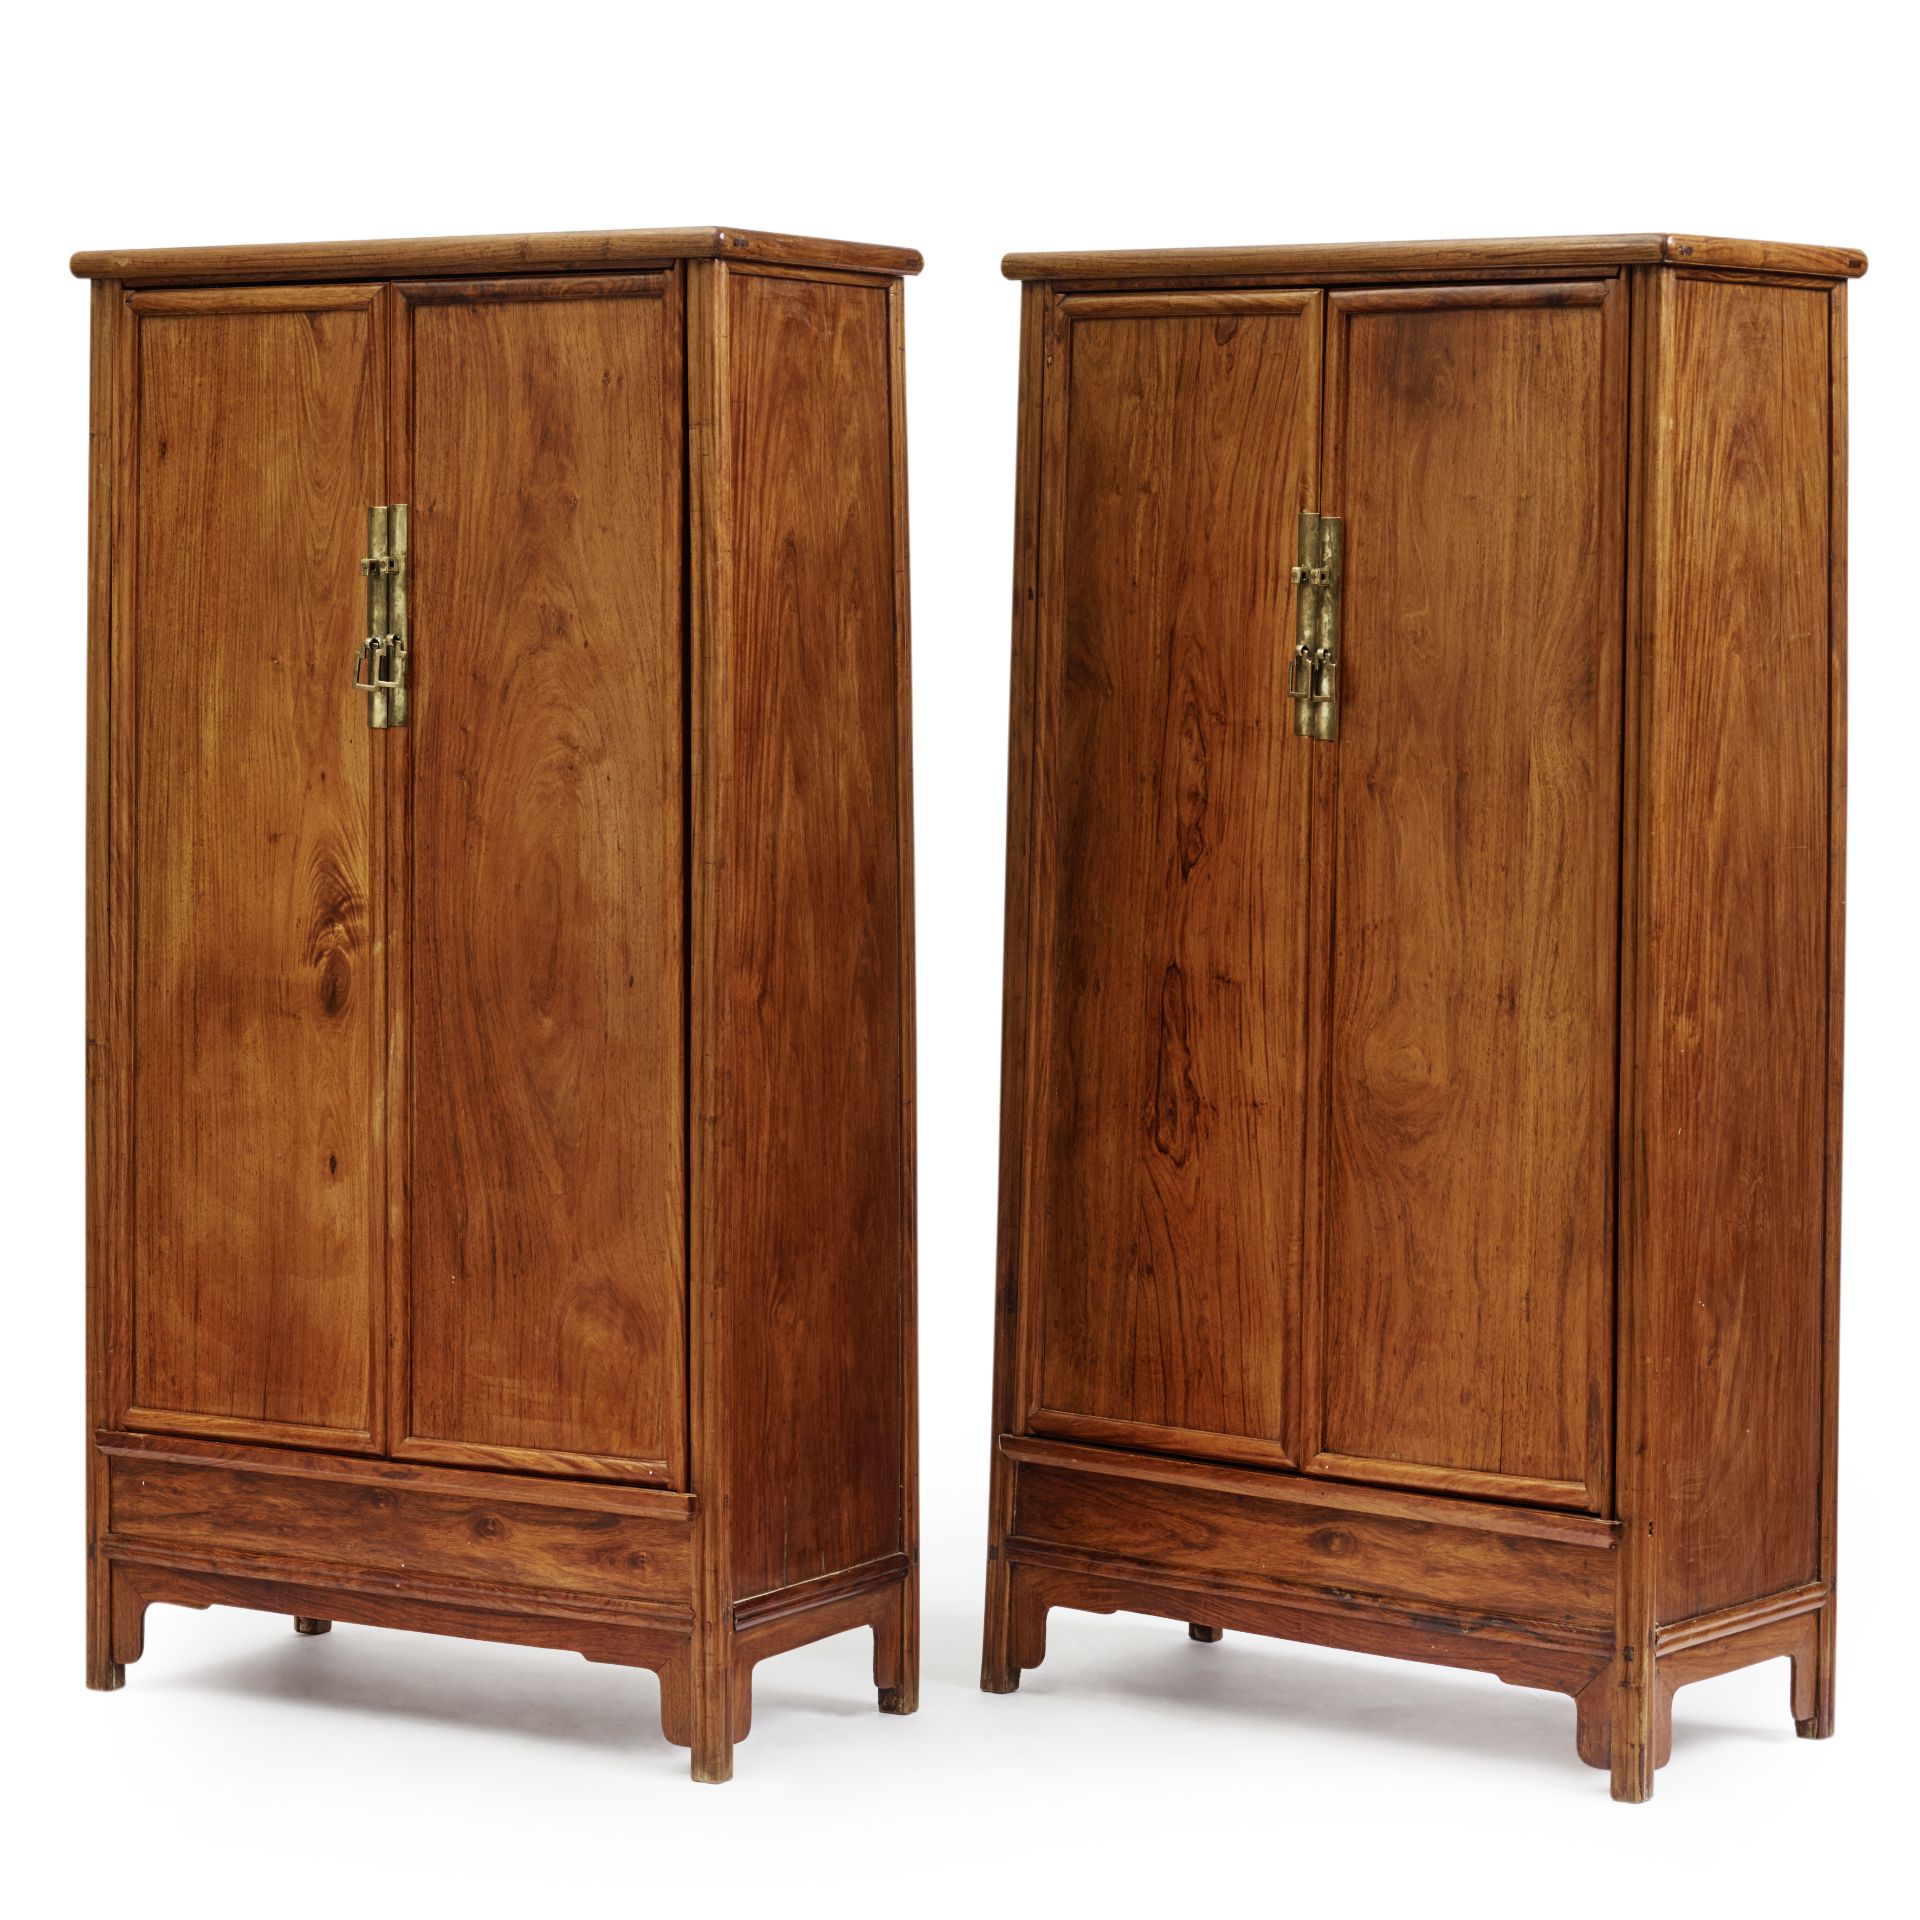 A PAIR OF FINE HUANGHUALI ROUND-CORNER CABINETS, YUANJIAOGUI 18th century (2)